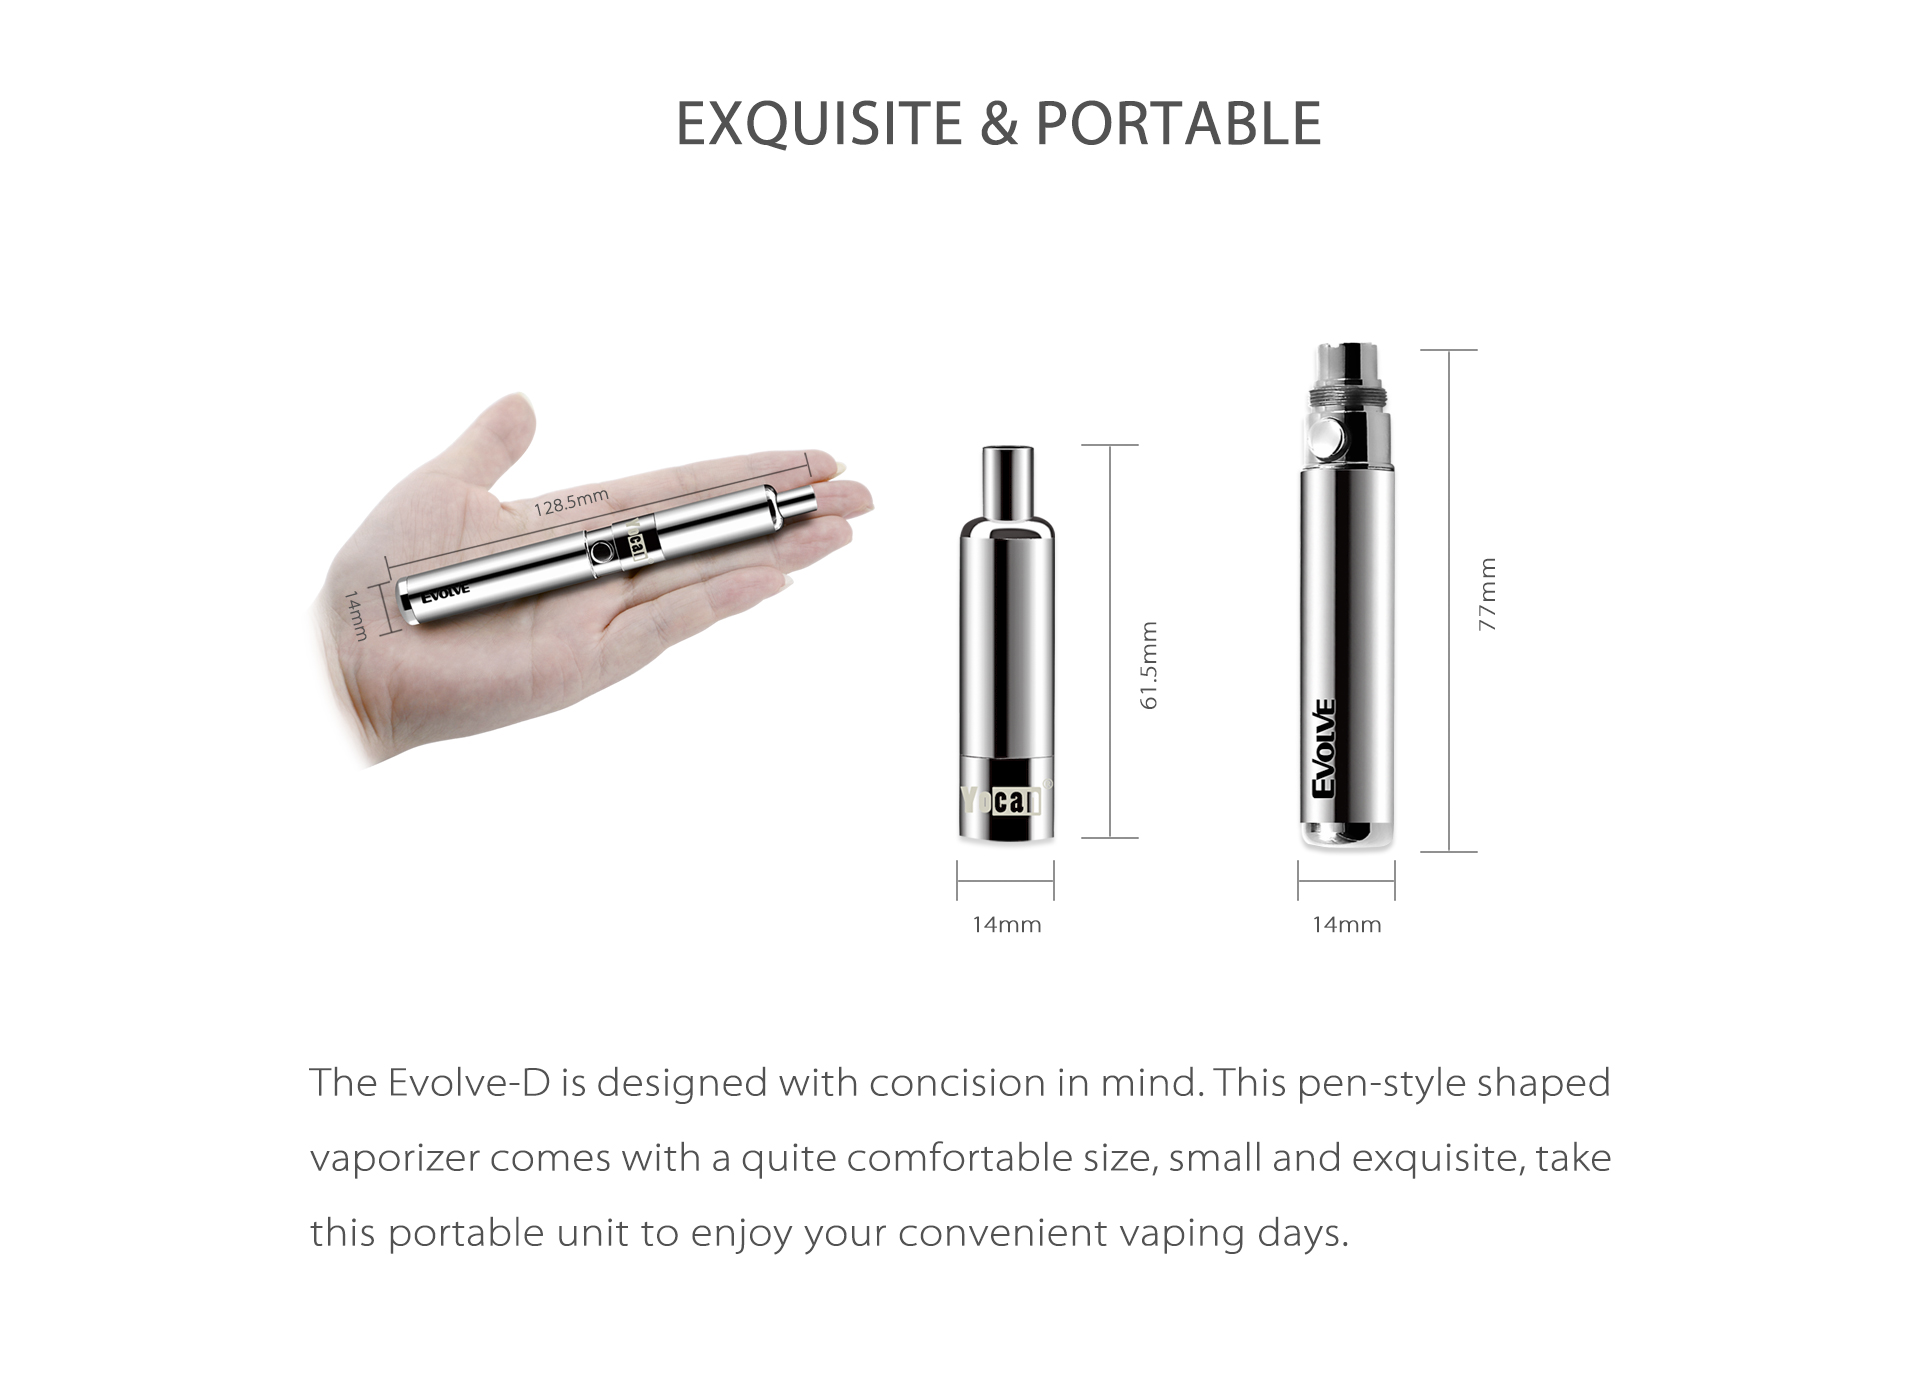 Yocan Evolve-D vaporizer pen 2020 version is exquisite and portable.